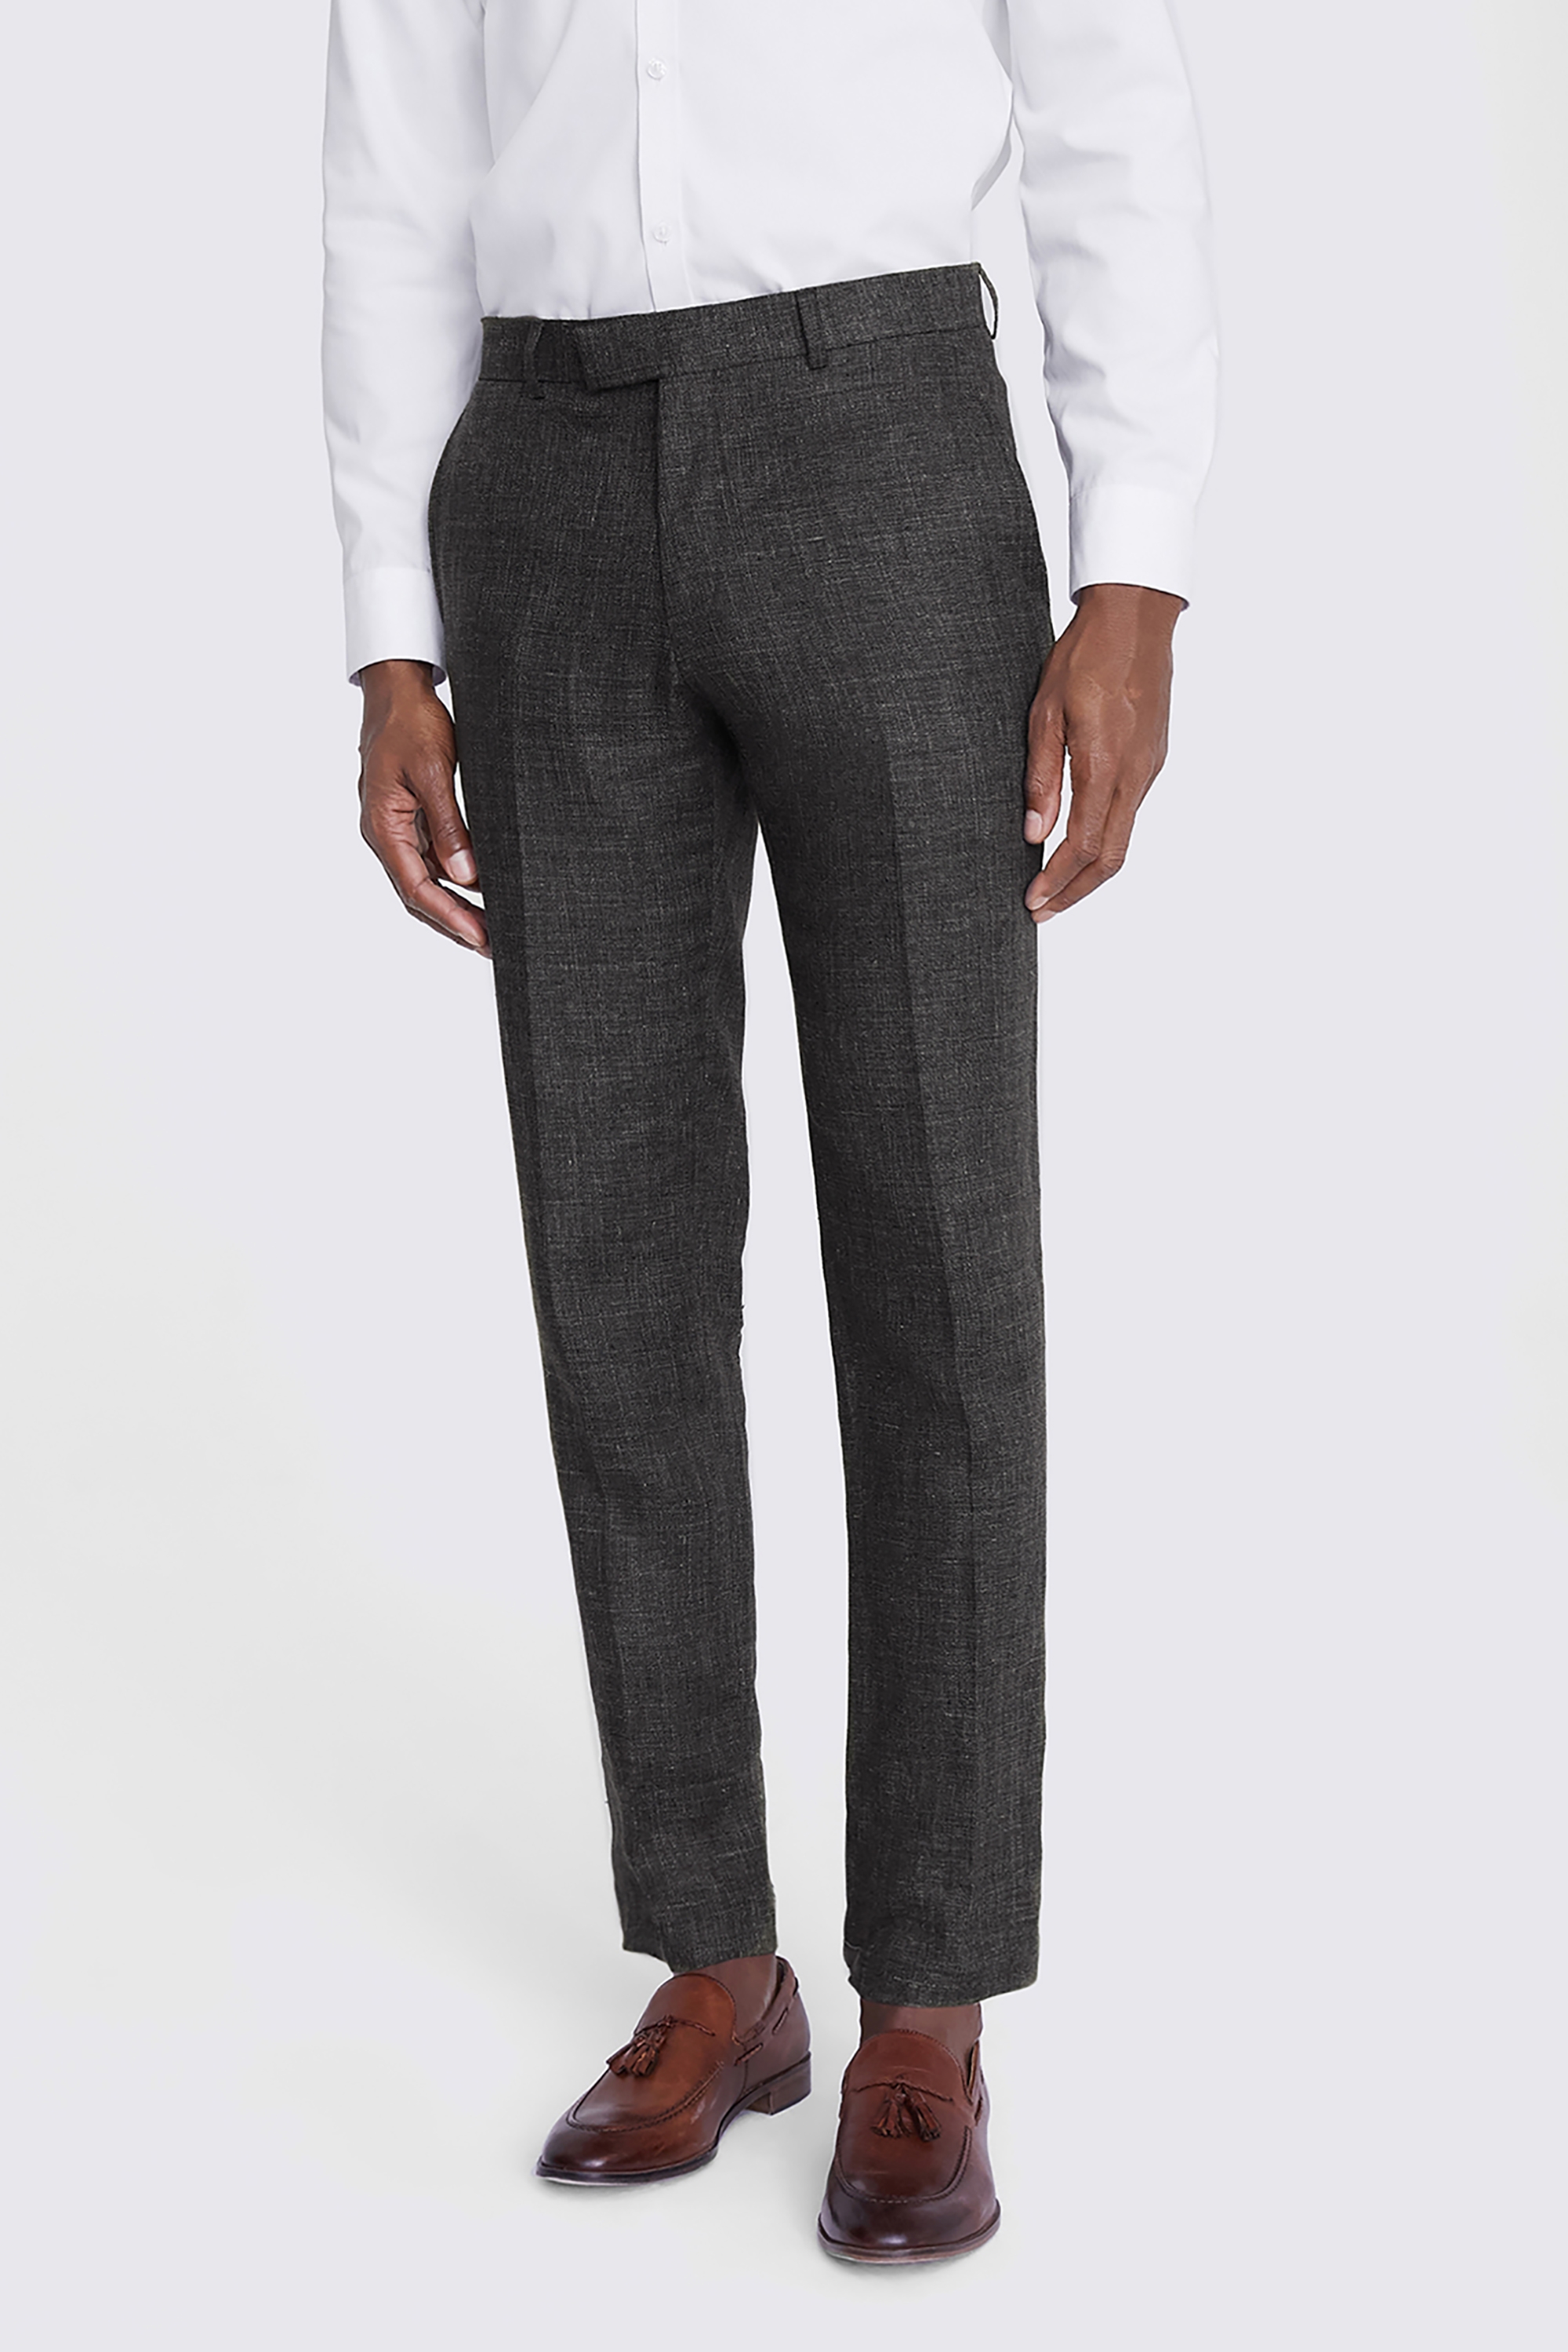 Tailored Fit Khaki Linen Trousers | Buy Online at Moss